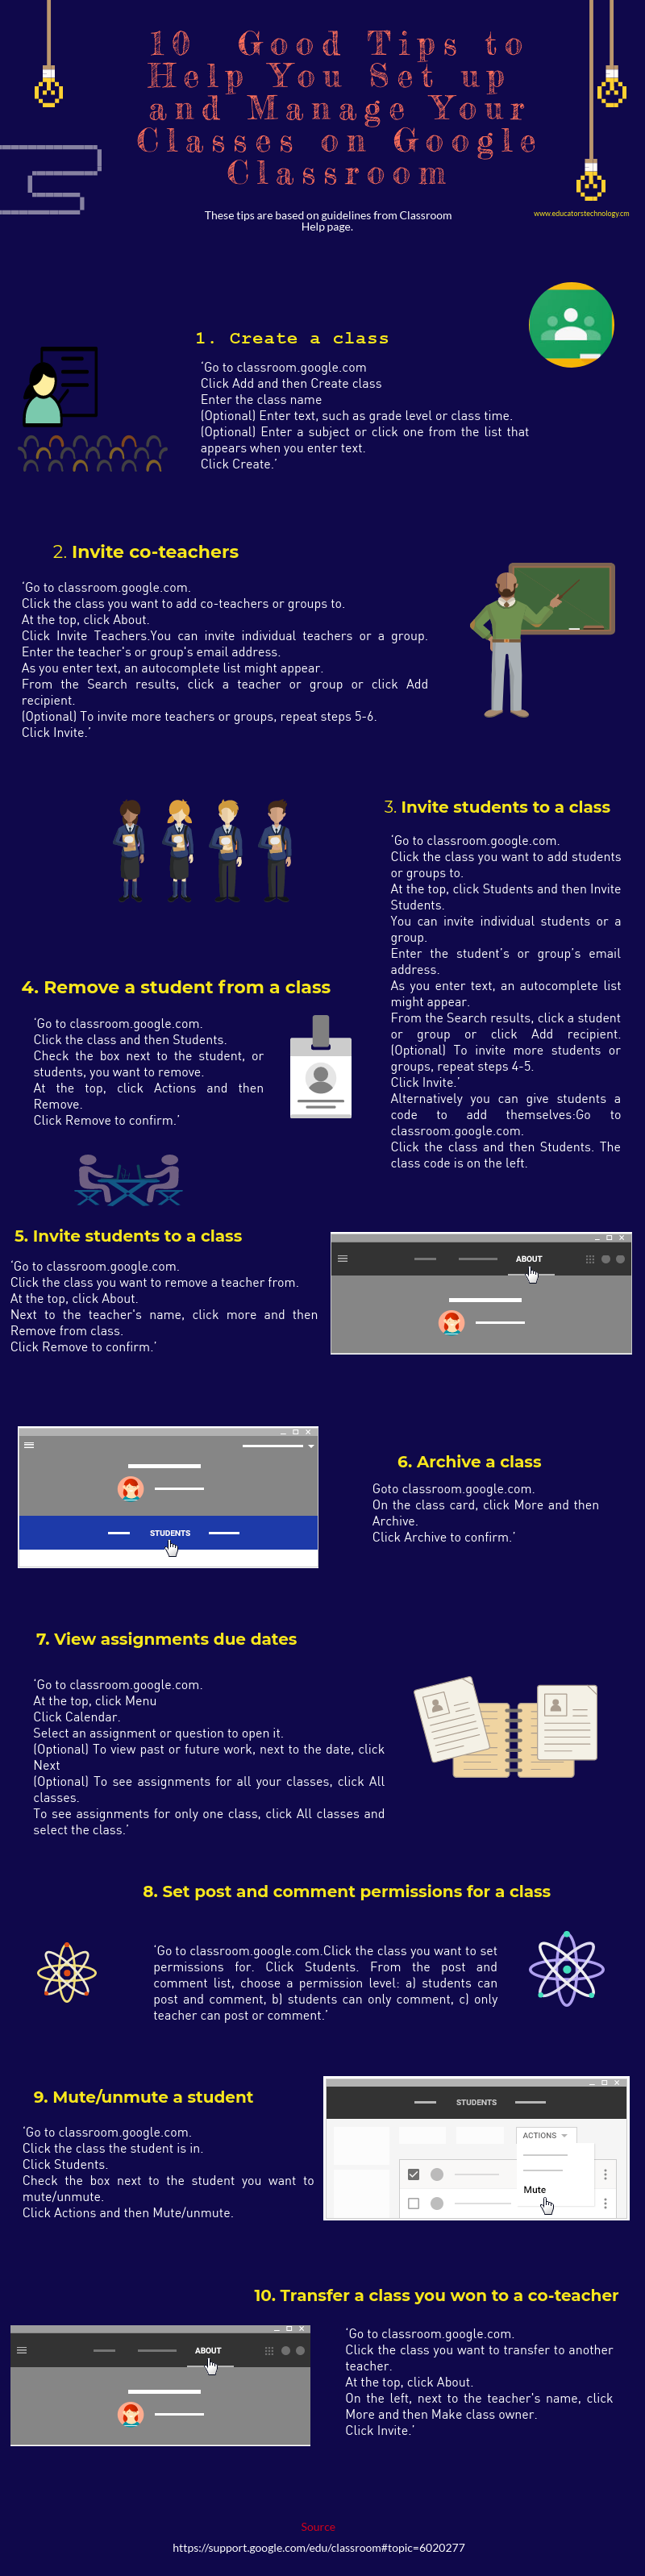 10  Good Tips to Help You Set up  and Manage Your Classes on Google Classroom